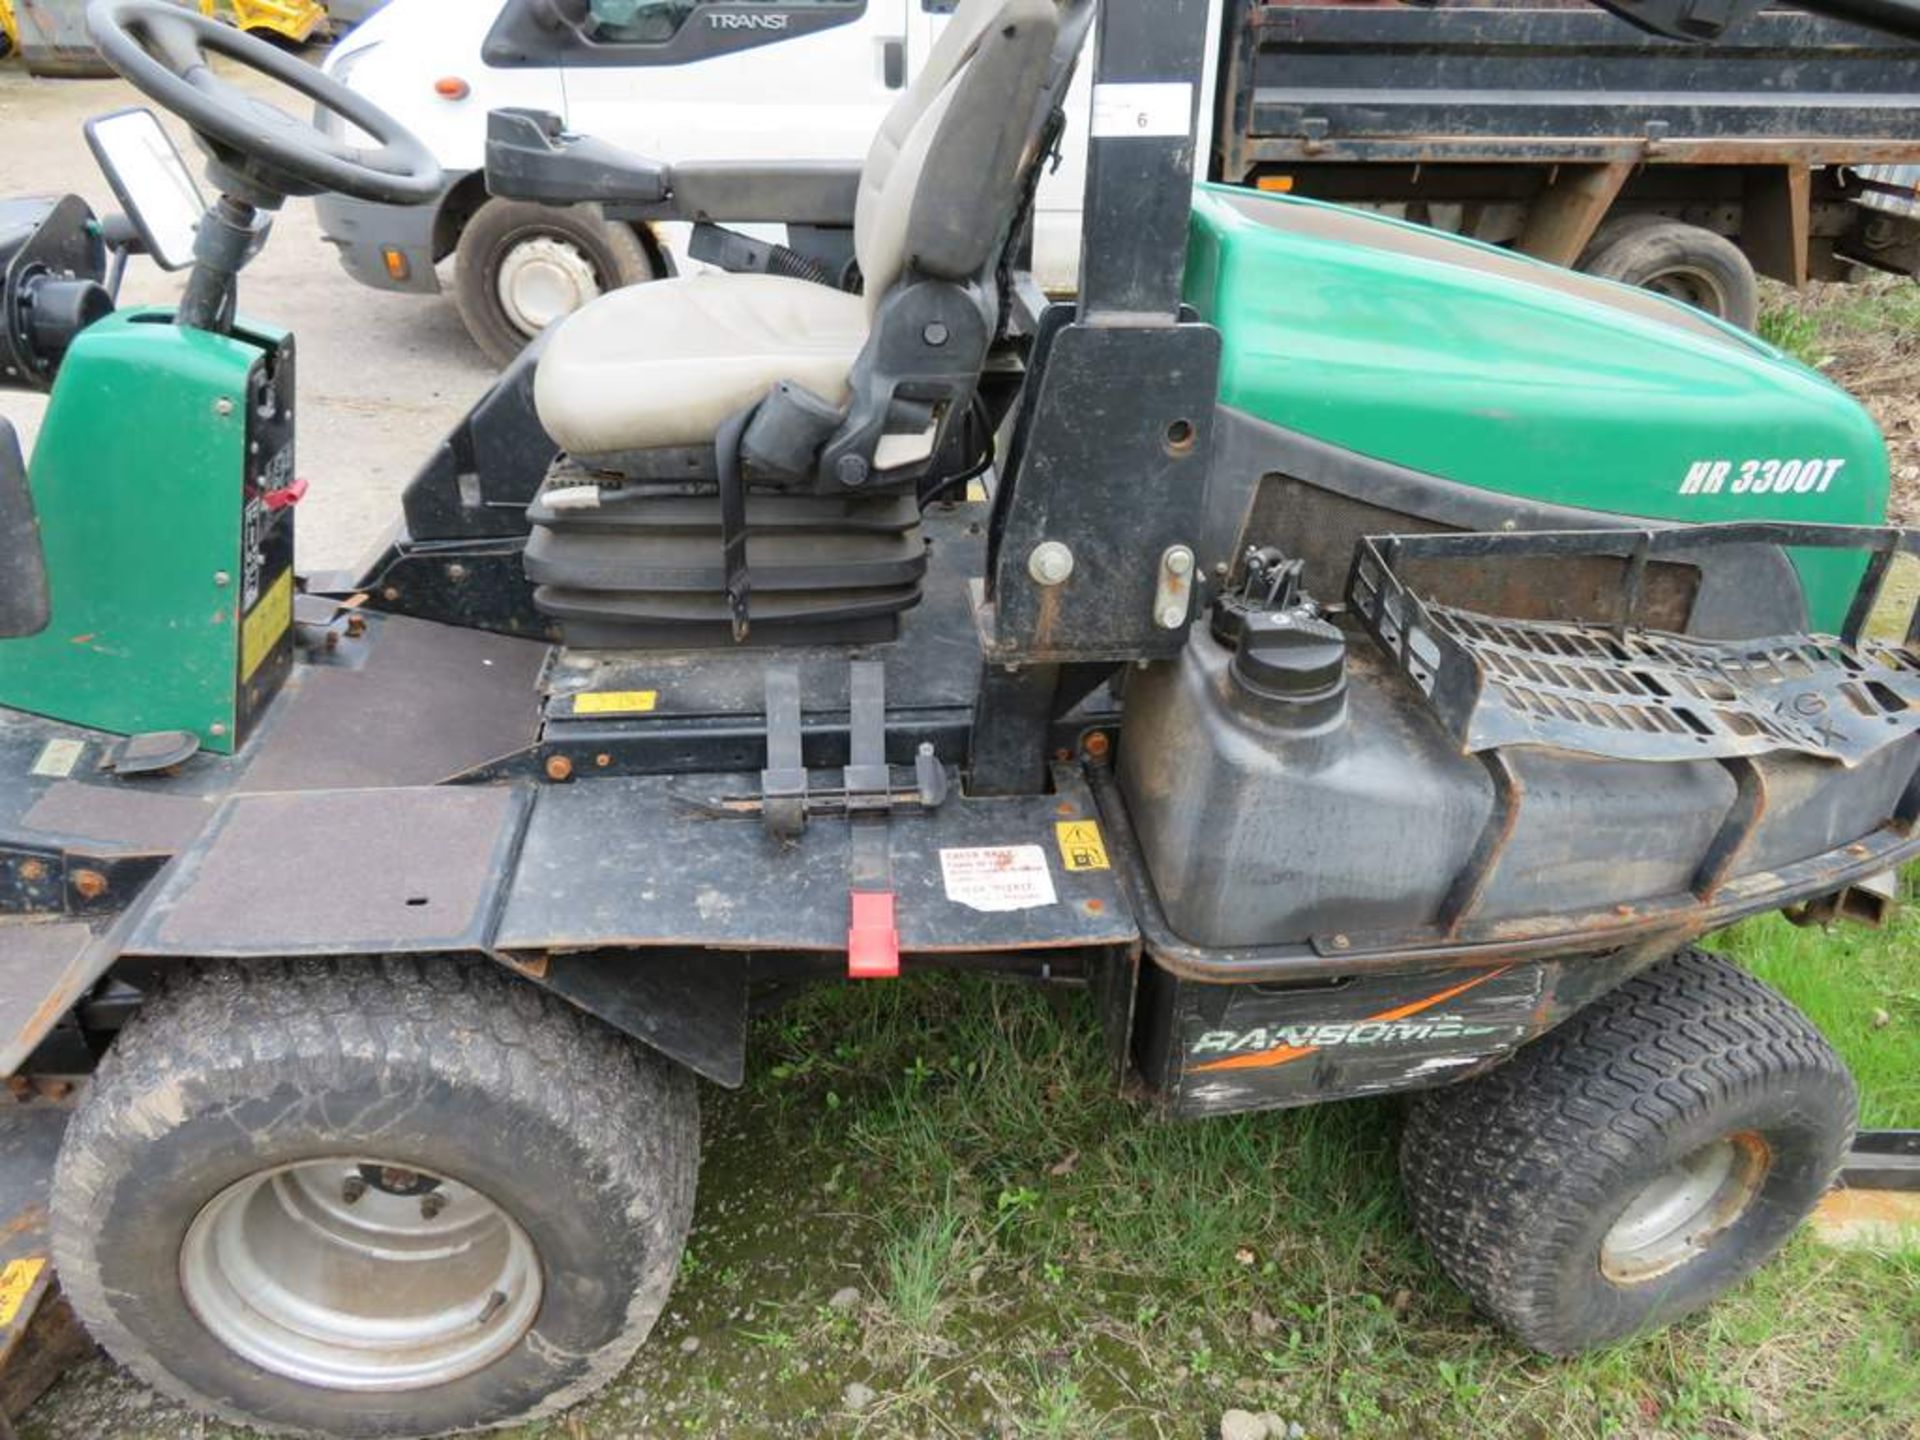 2009 Ransomes HR 3300T Out Front Cutting Deck Mower - FX09 ABF - Image 2 of 16